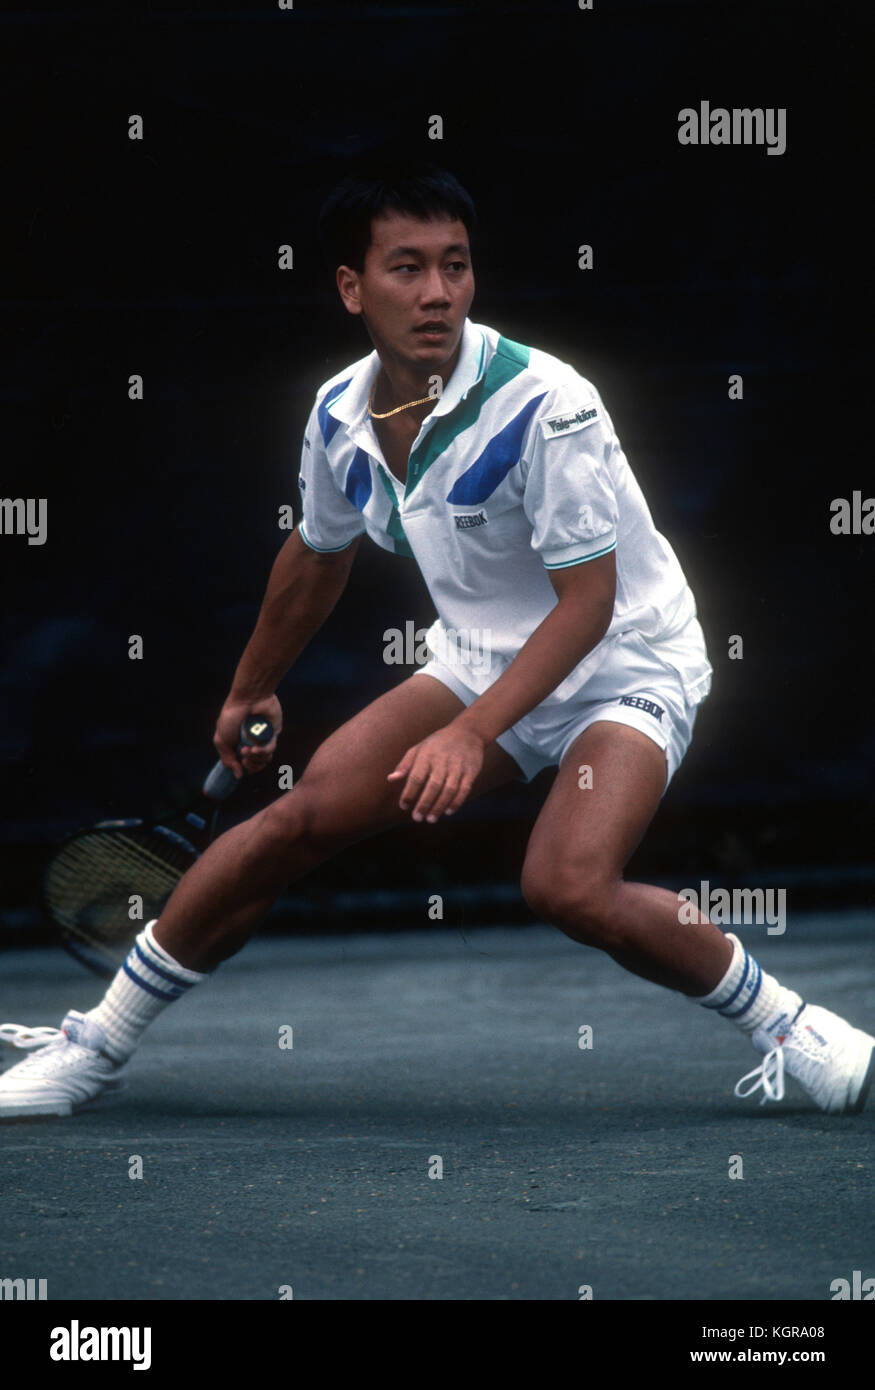 Michael Chang watching the ball after being pulled wide for a forheand during a match at the World Championship Tennis event in Forest Hills, New York, 1989. Stock Photo